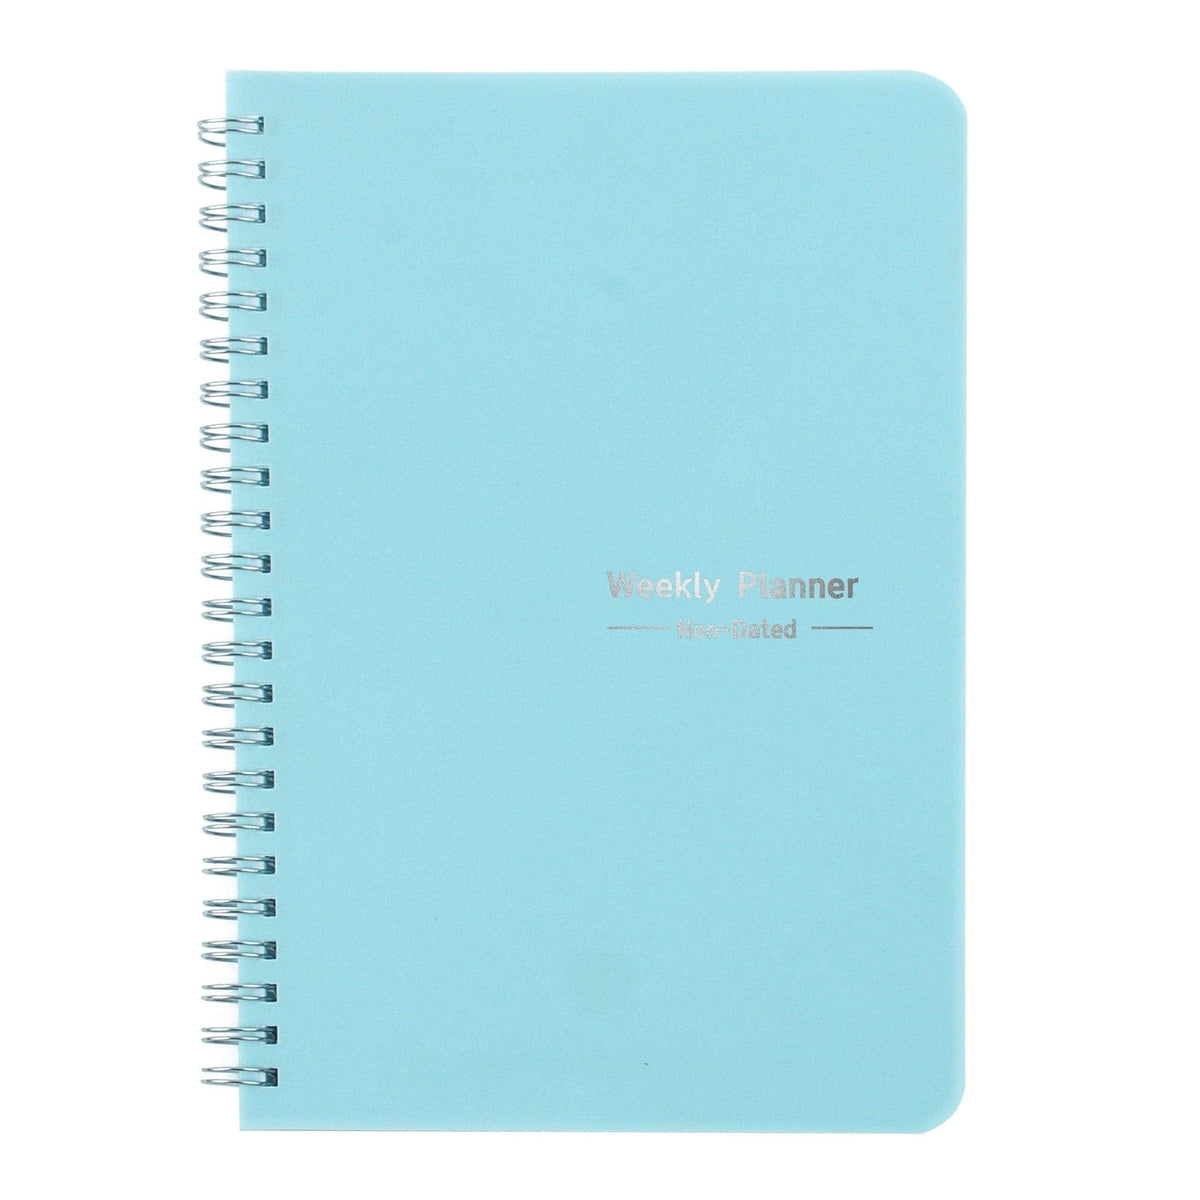 KUMA Stationery & Crafts  Stationery blue A5 Weekly Planner with Habit Tracker